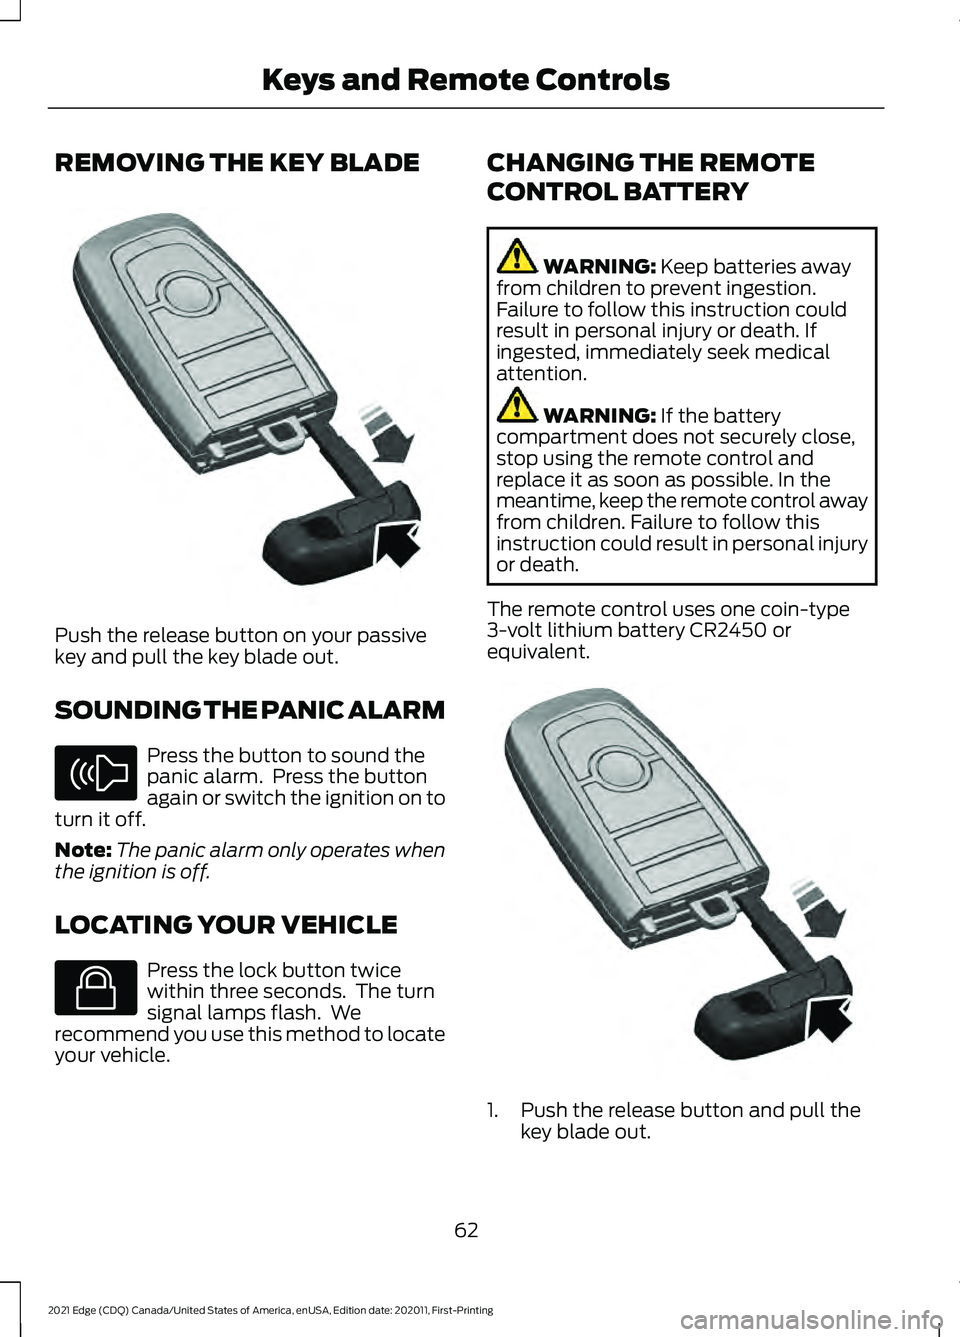 FORD EDGE 2021  Owners Manual REMOVING THE KEY BLADE
Push the release button on your passive
key and pull the key blade out.
SOUNDING THE PANIC ALARM
Press the button to sound the
panic alarm.  Press the button
again or switch the